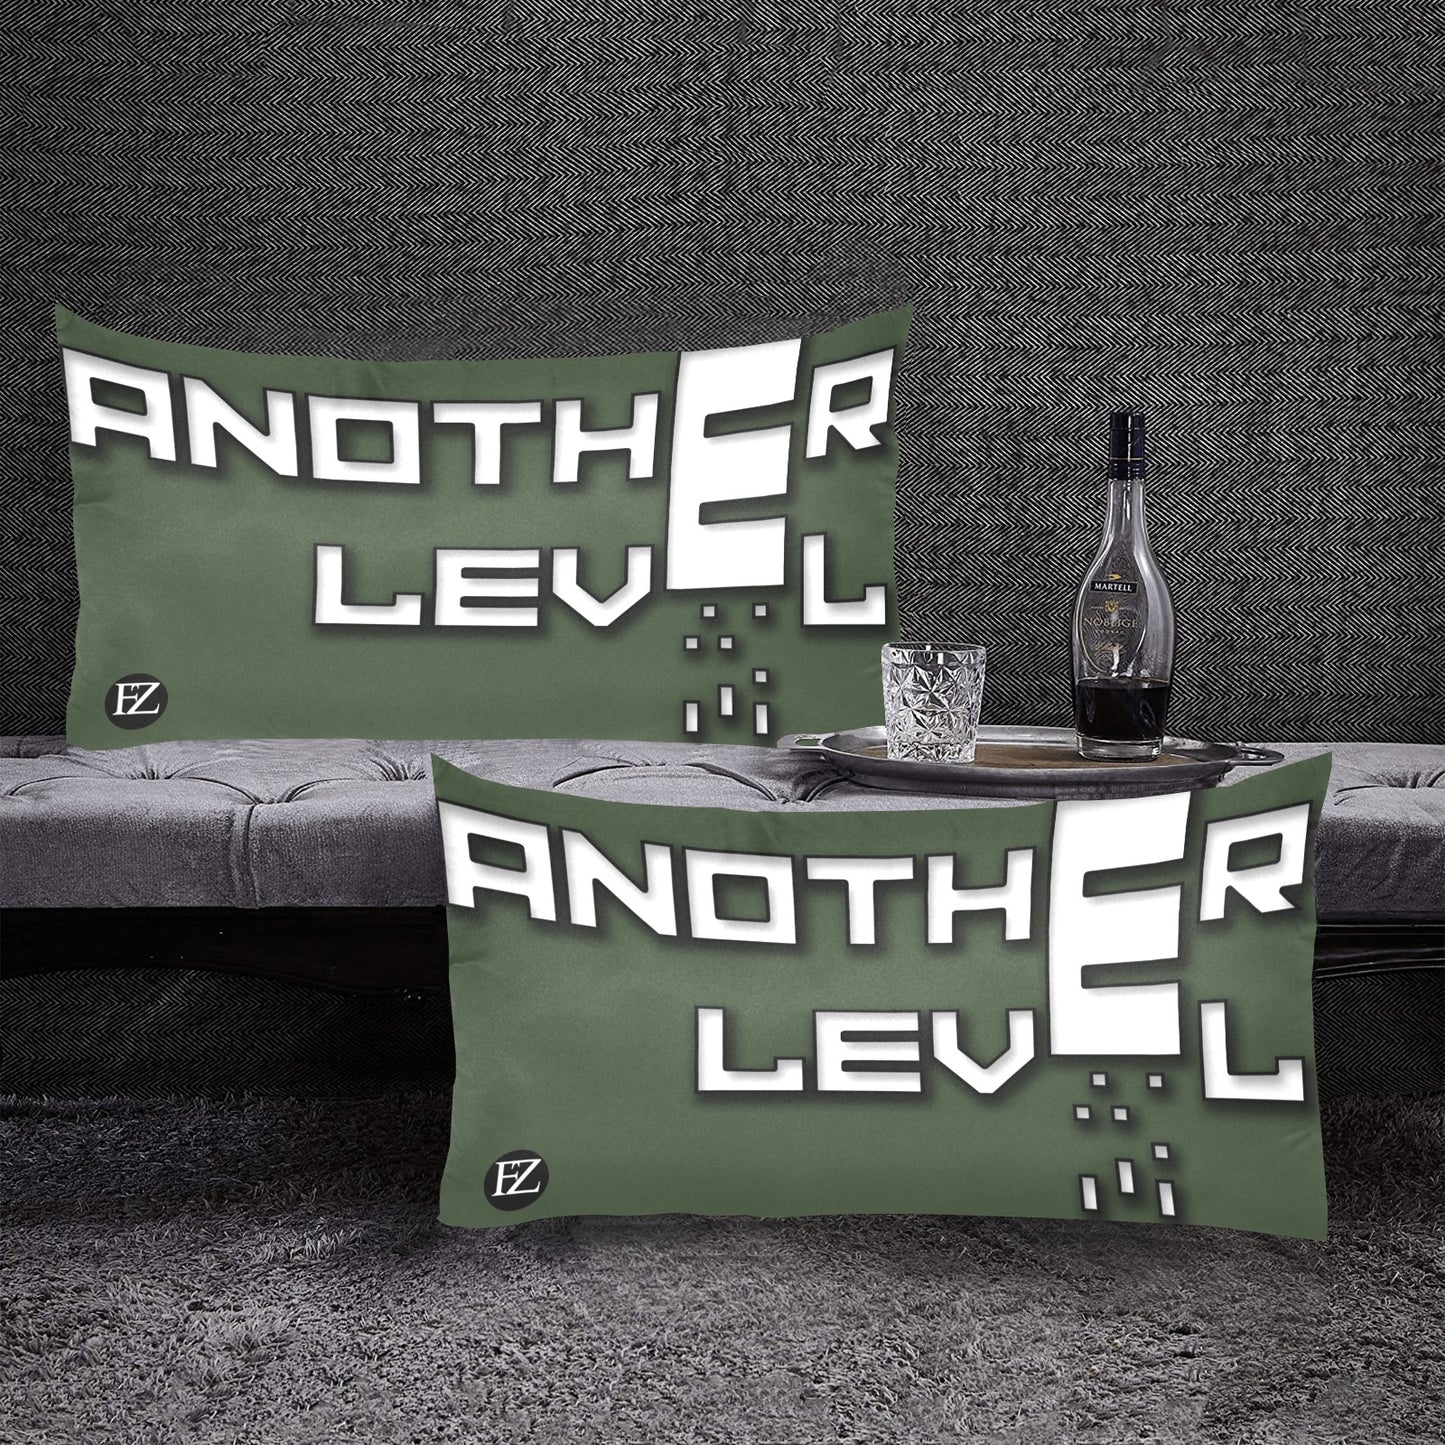 fz levels pillow case one size / fz levels pillow case - dark green rectangle pillow cases 20"x36"(one side)(pack of 2)